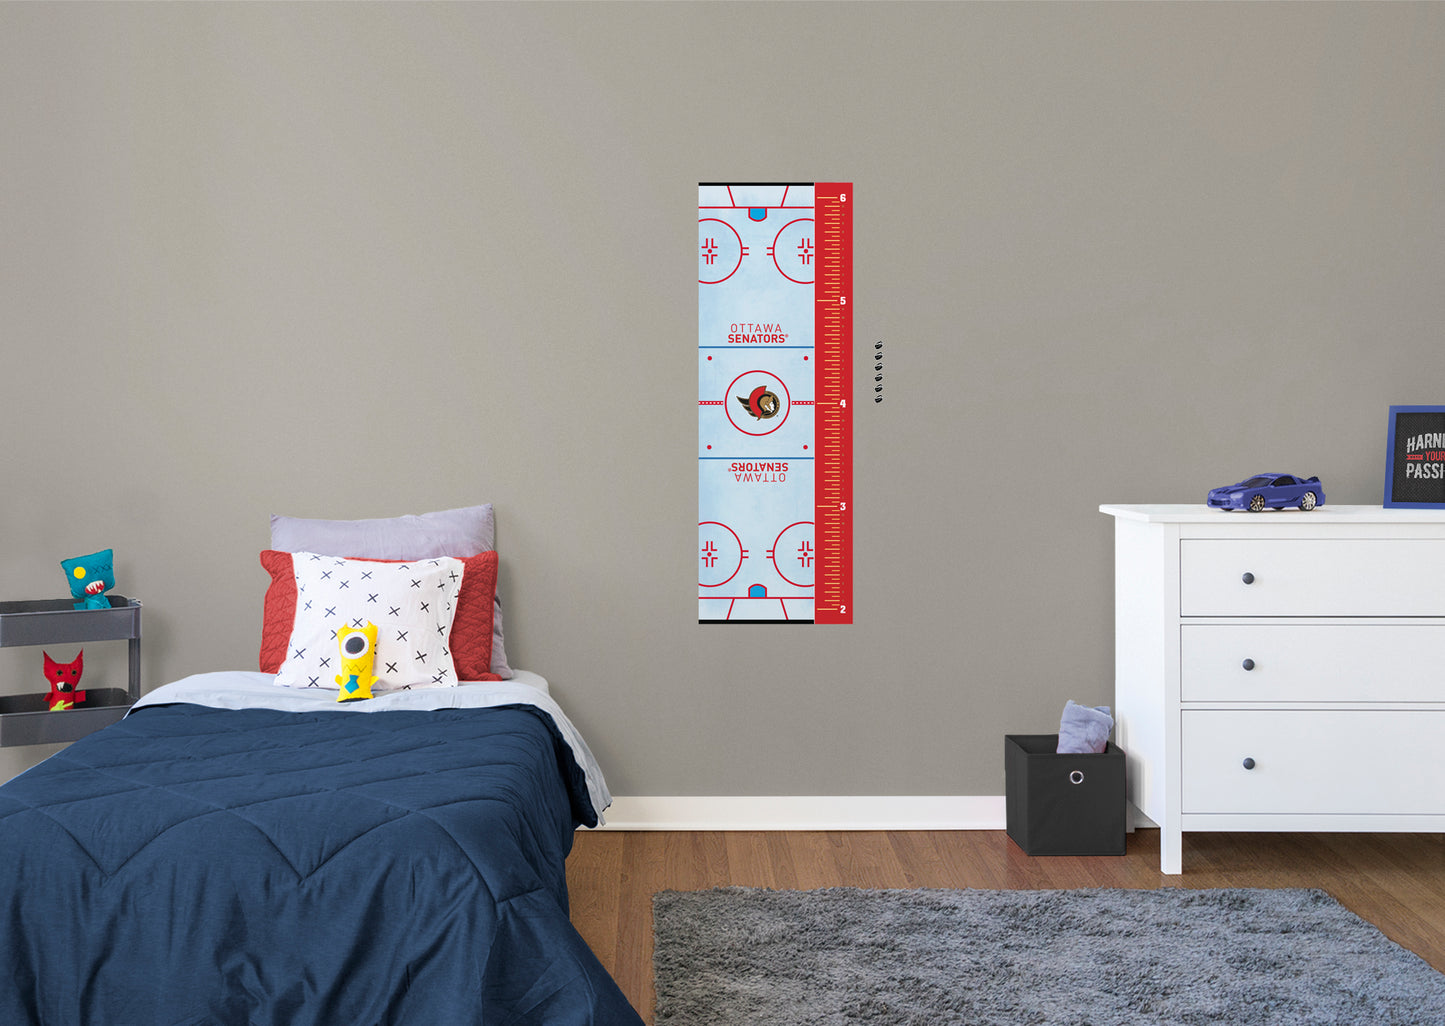 Ottawa Senators  Rink Growth Chart  - Officially Licensed NHL Removable Wall Decal